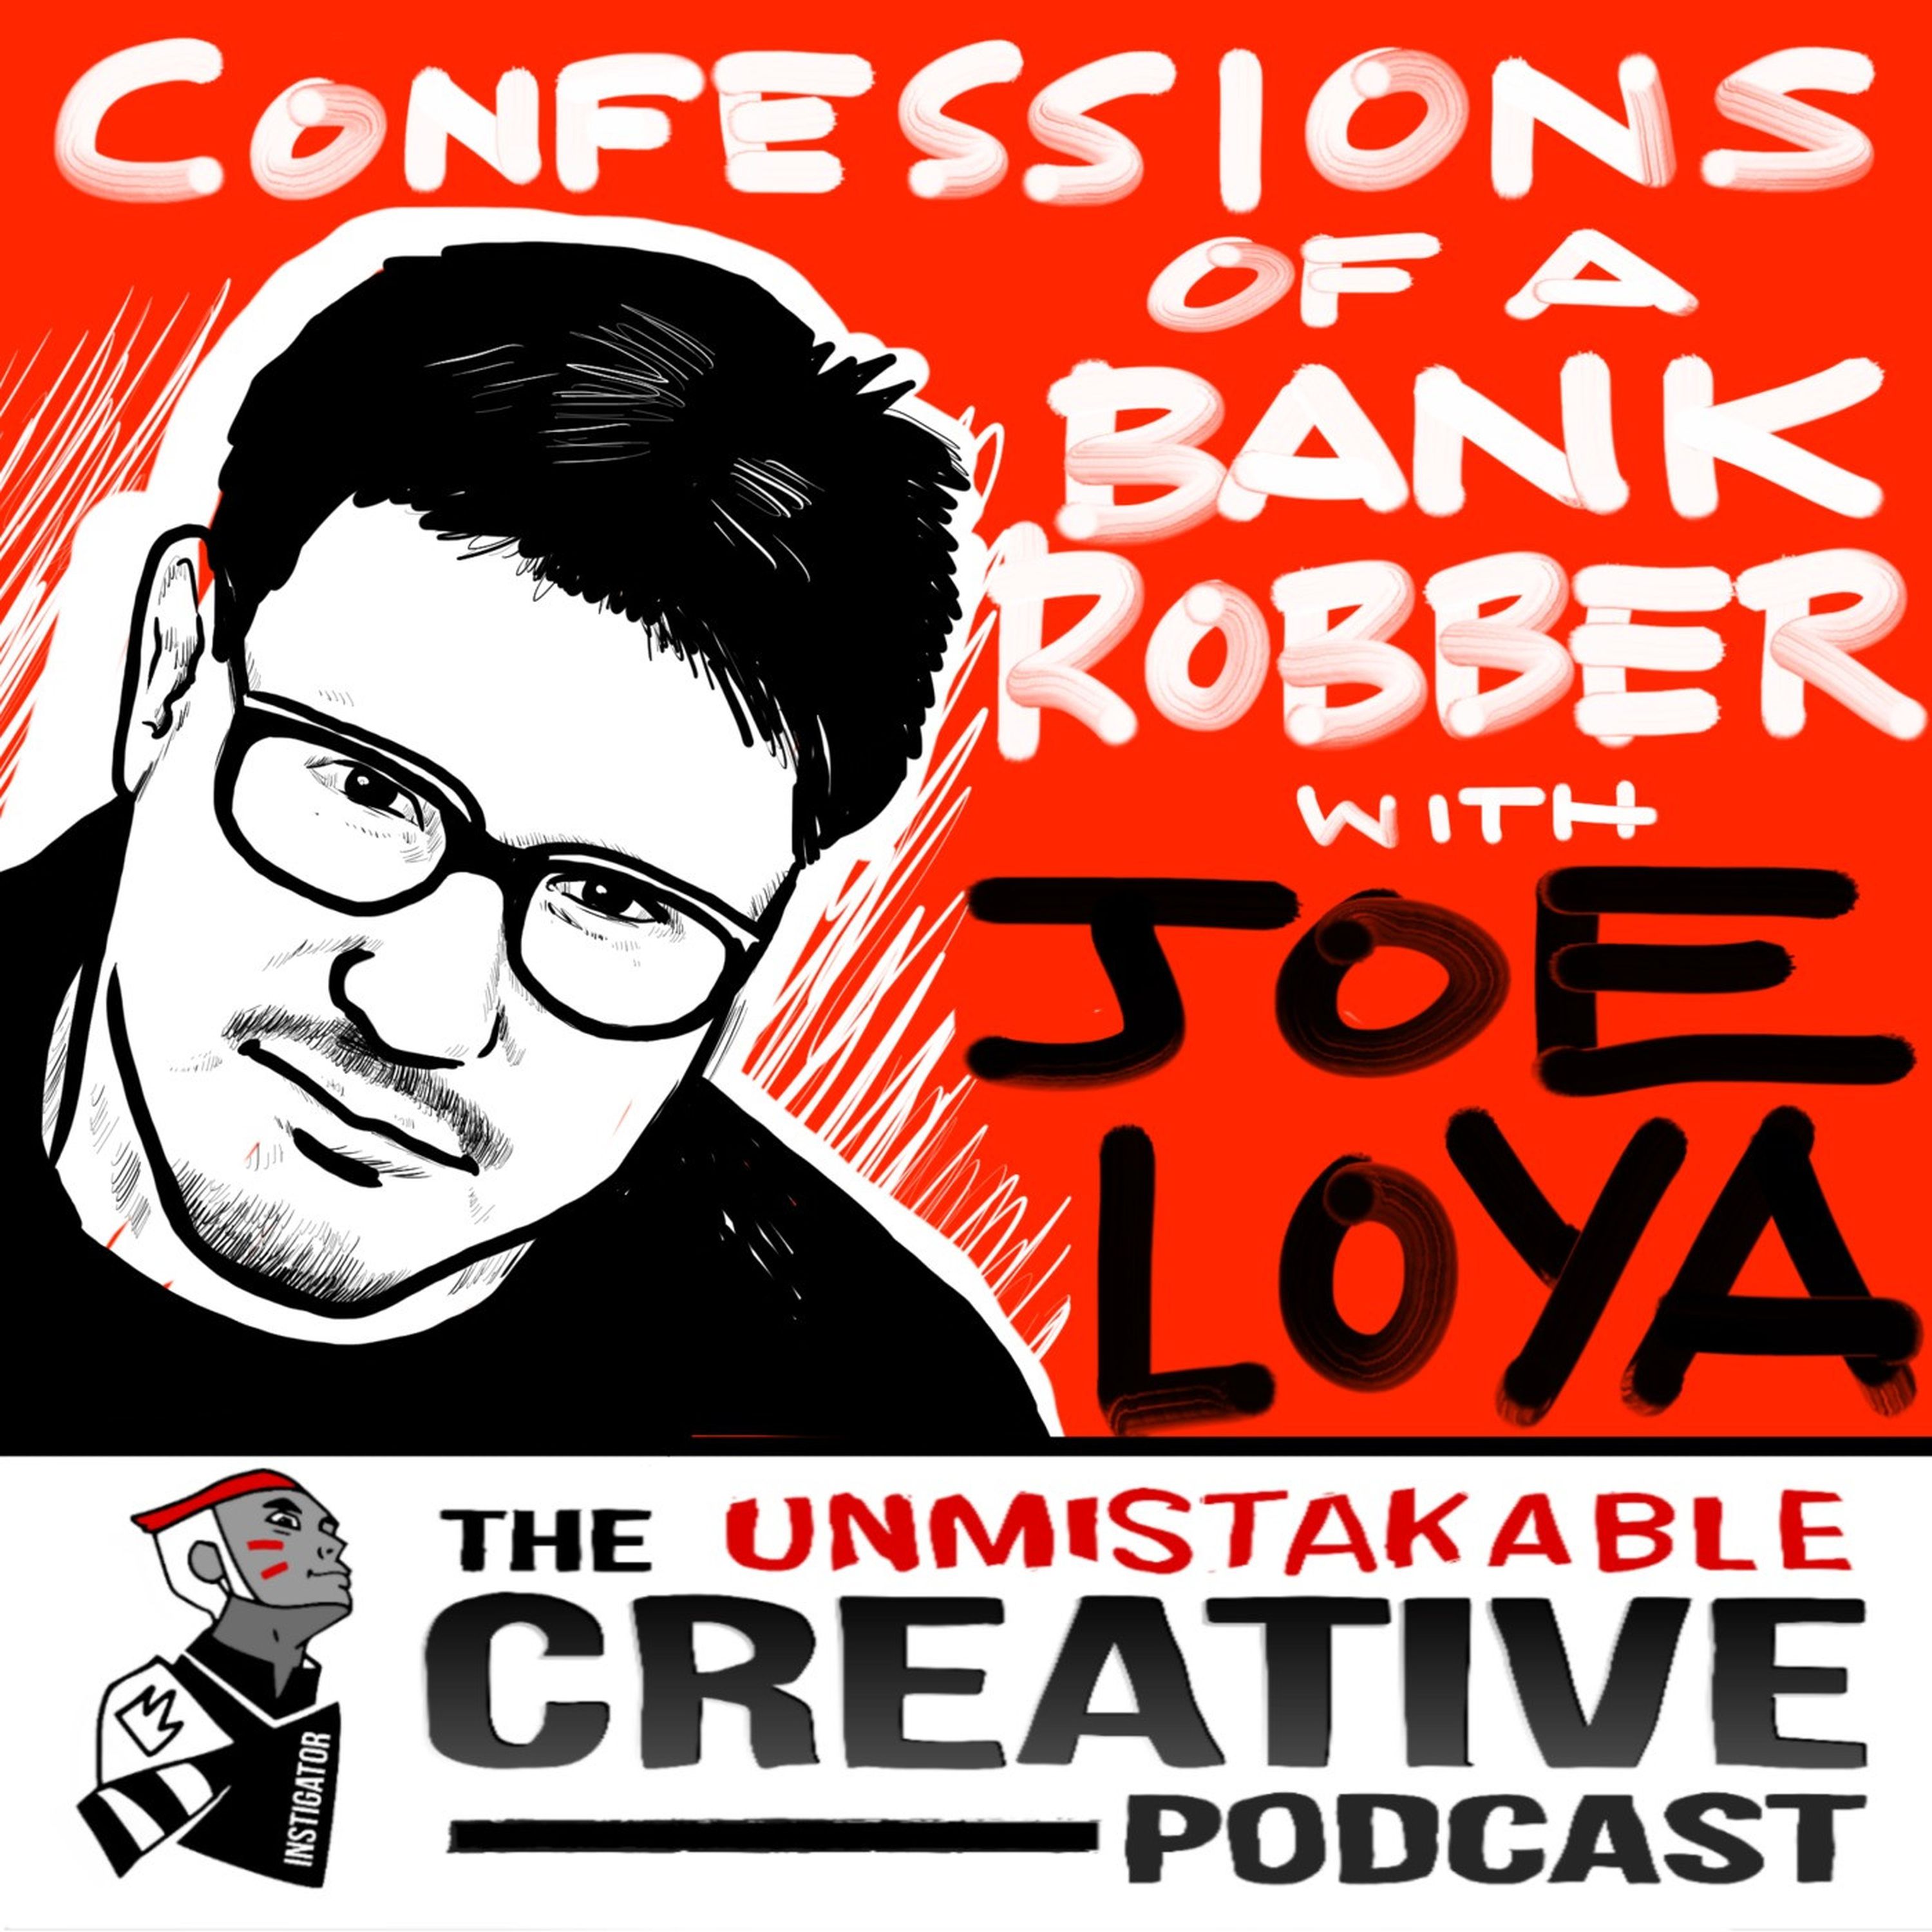 Confessions of a Bank Robber with Joe Loya Image